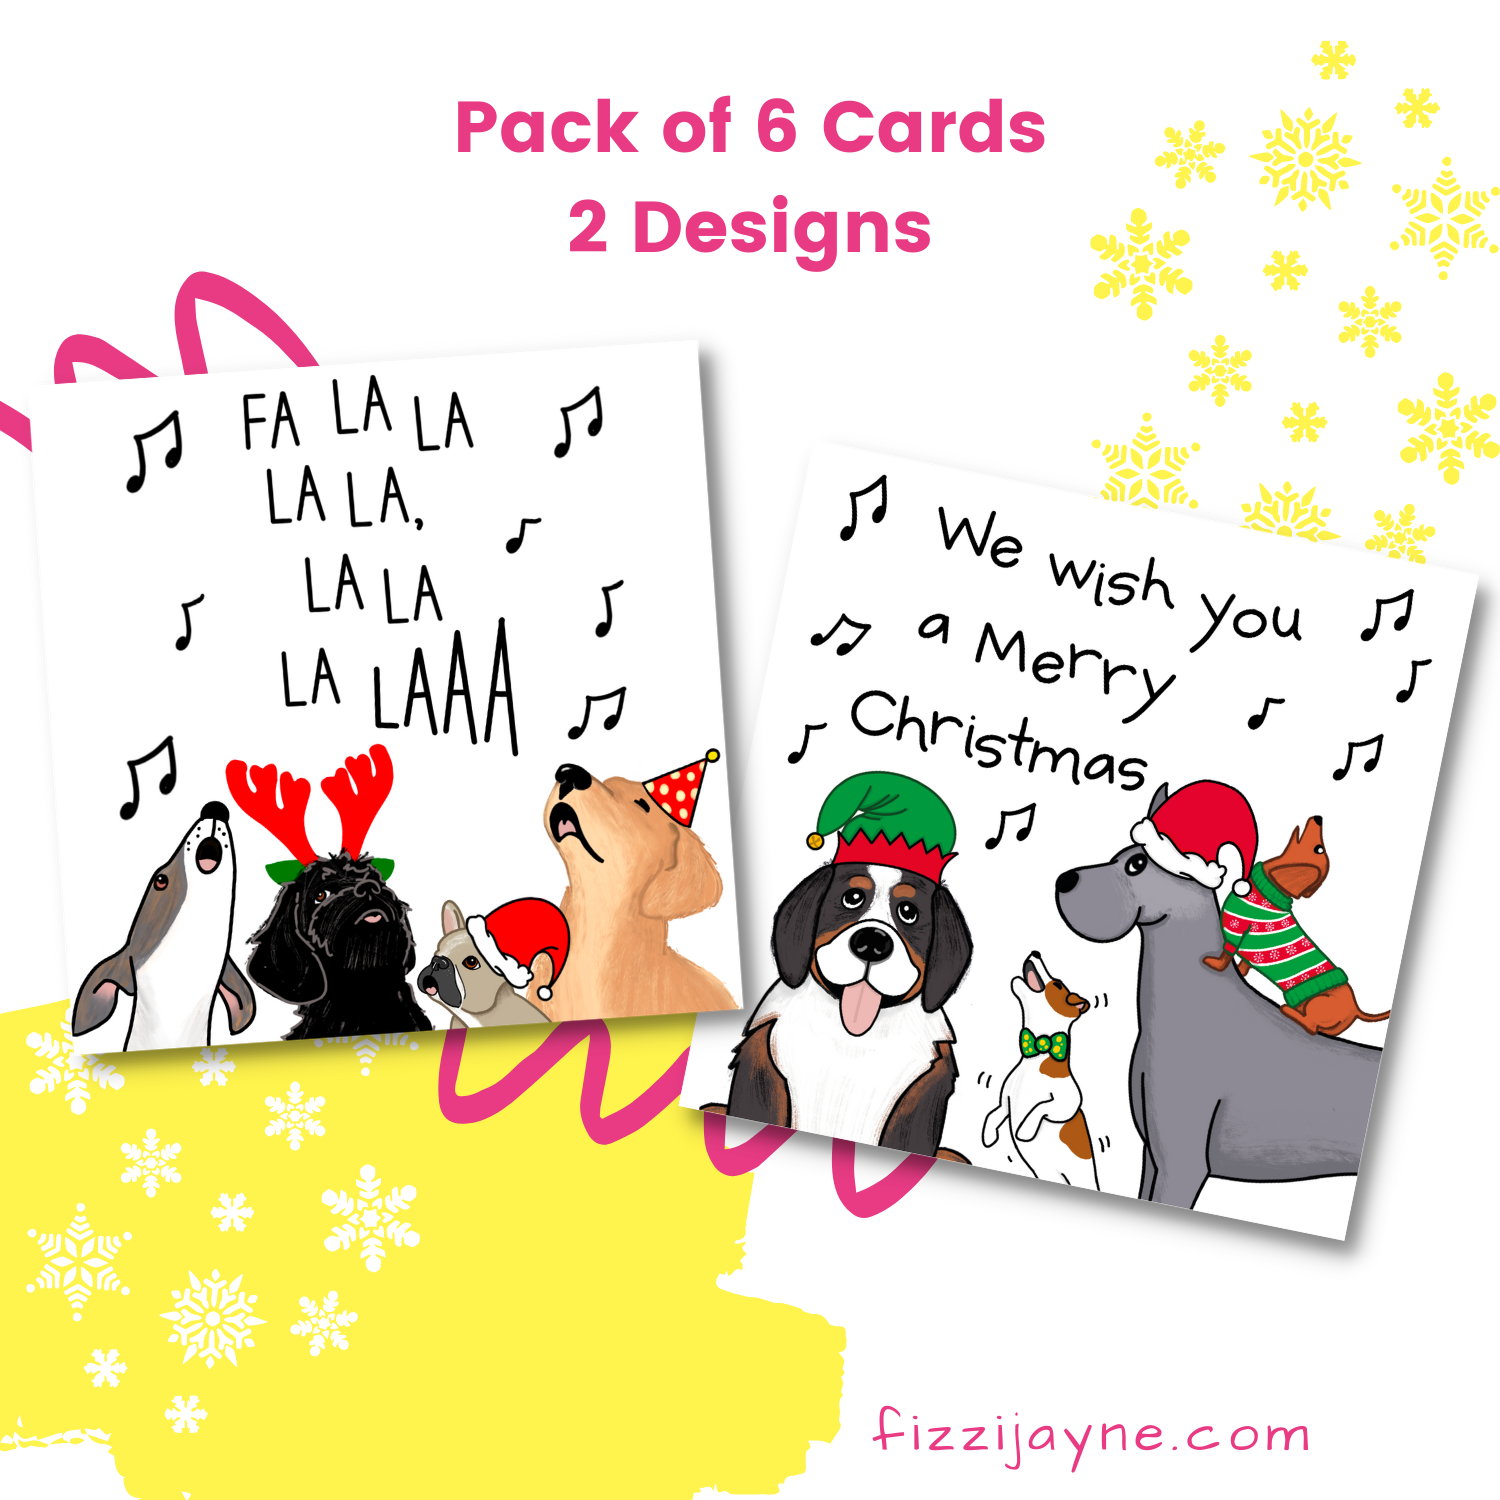 Pack of 6 Christmas cards, 2 designs of Dogs dressed in festive outfits and singing carols